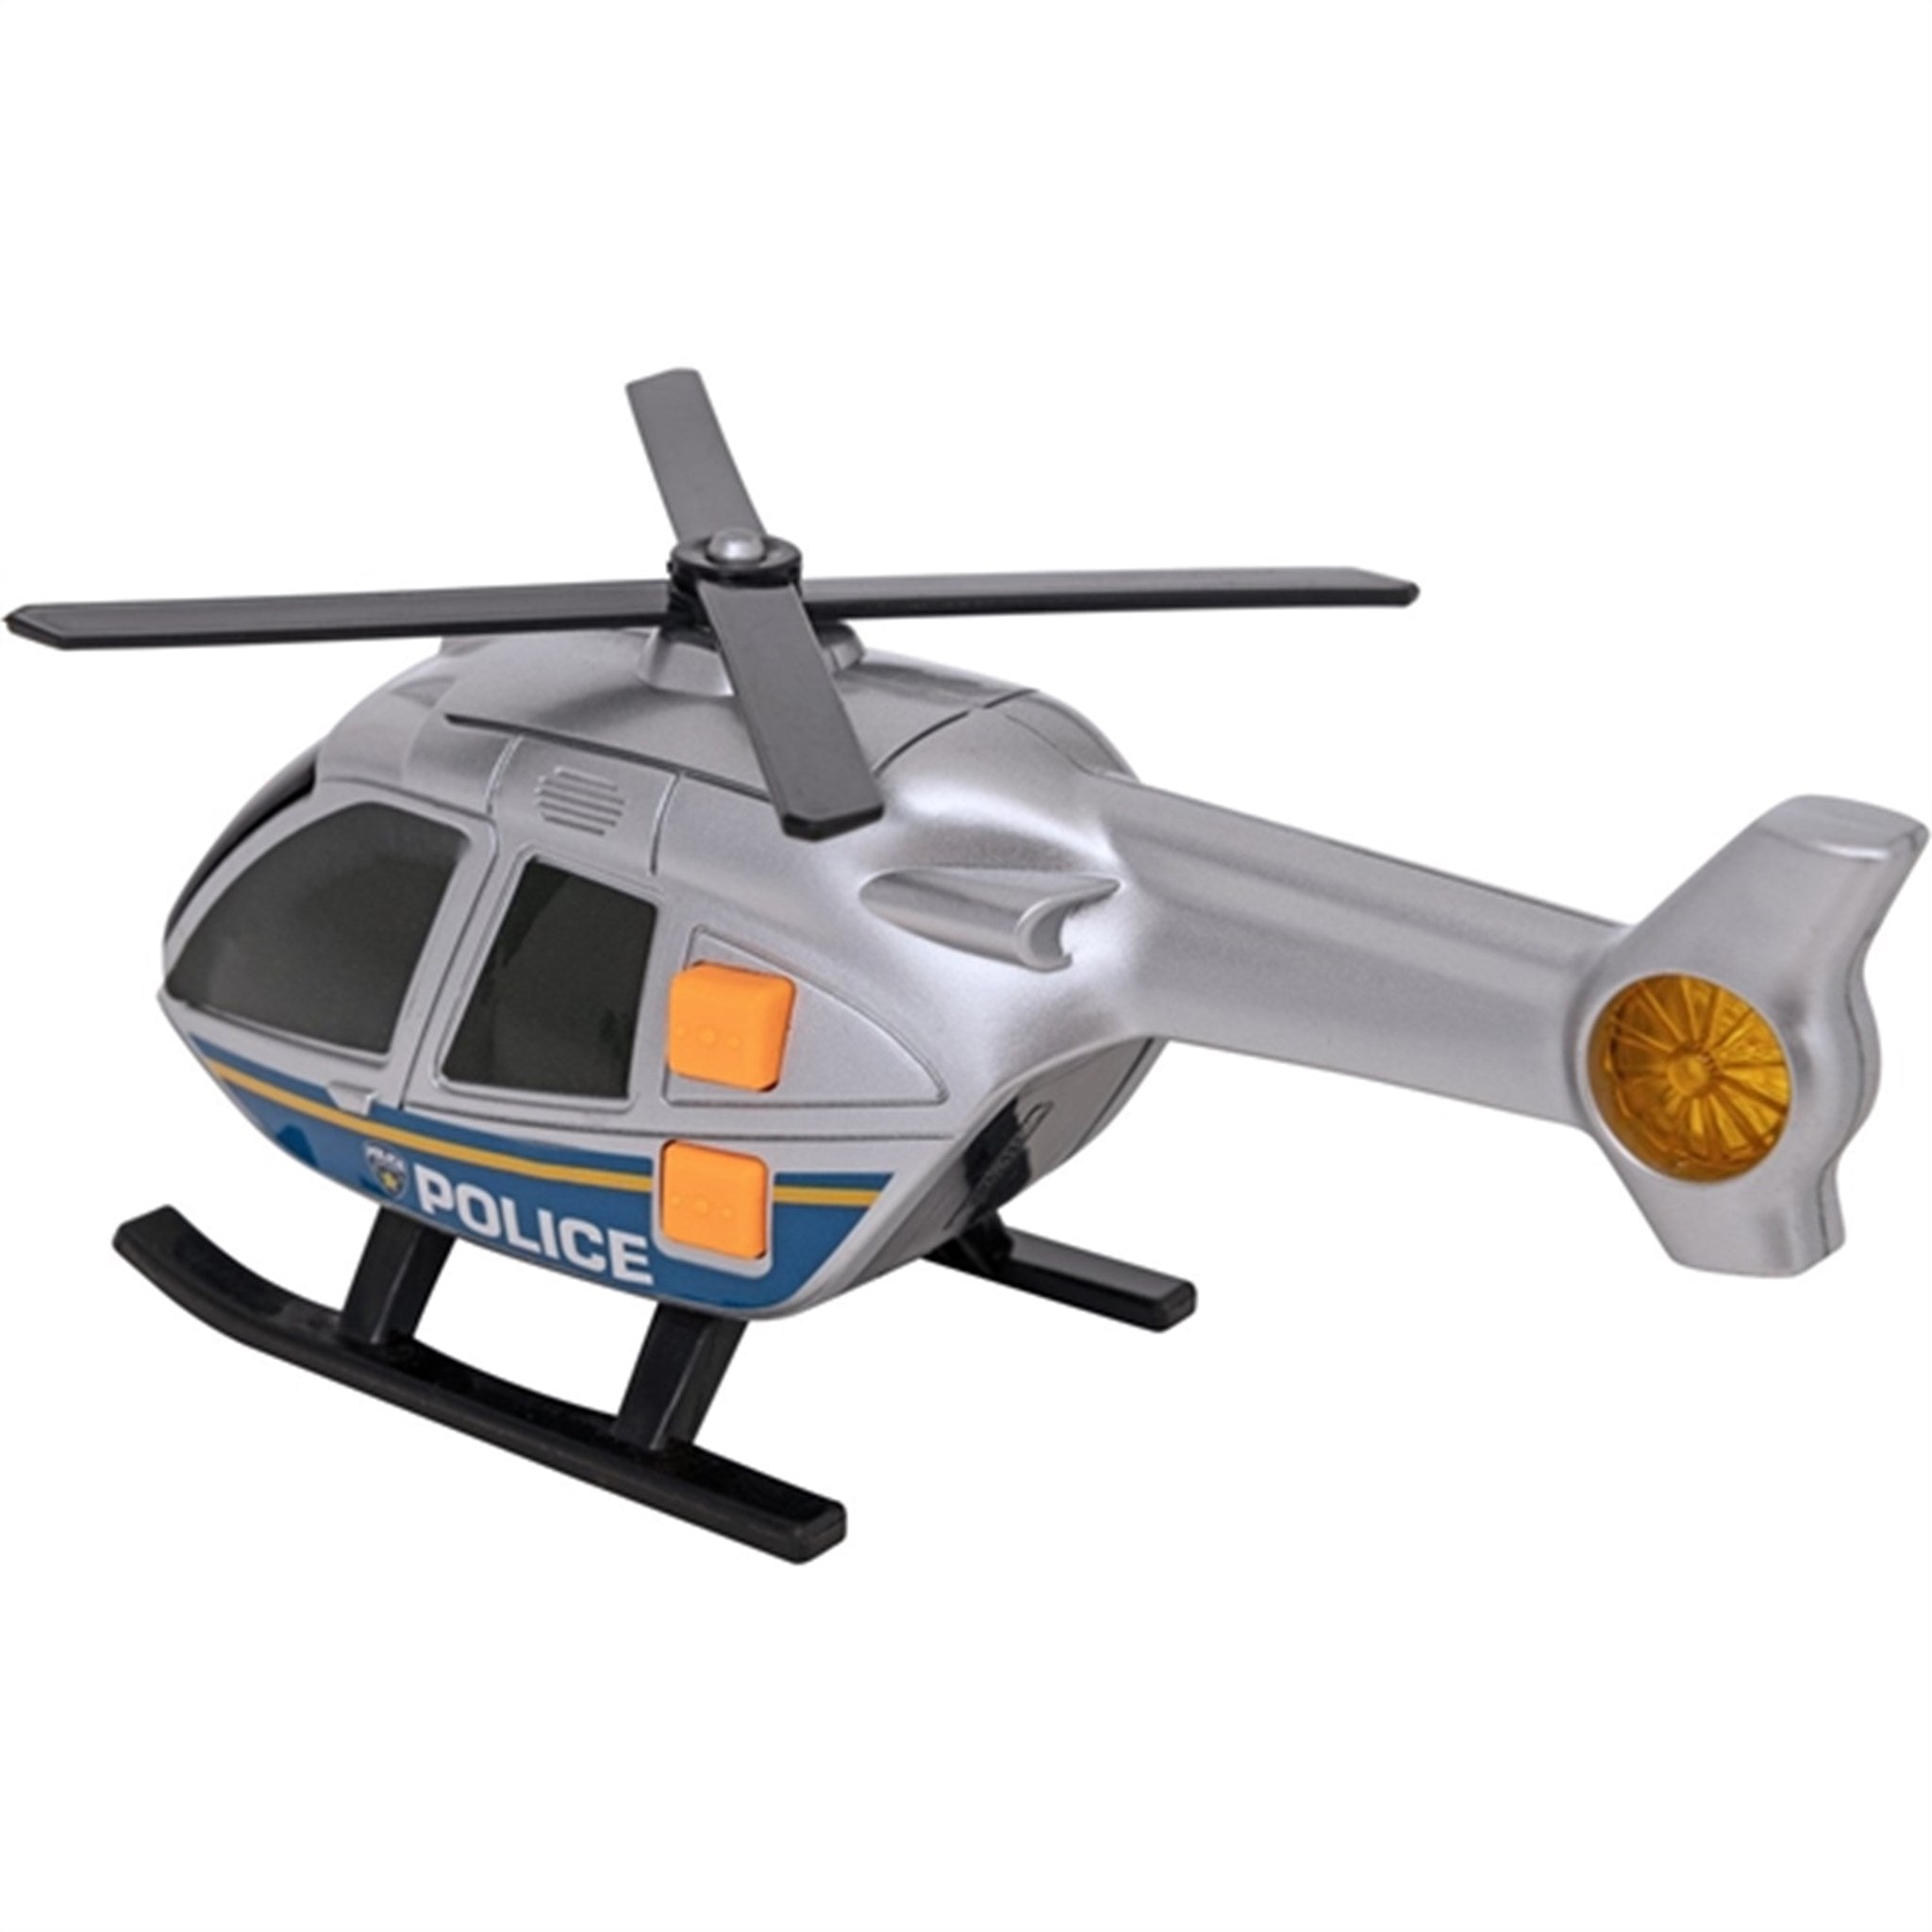 Teamsterz Small L&S Helikopter 5